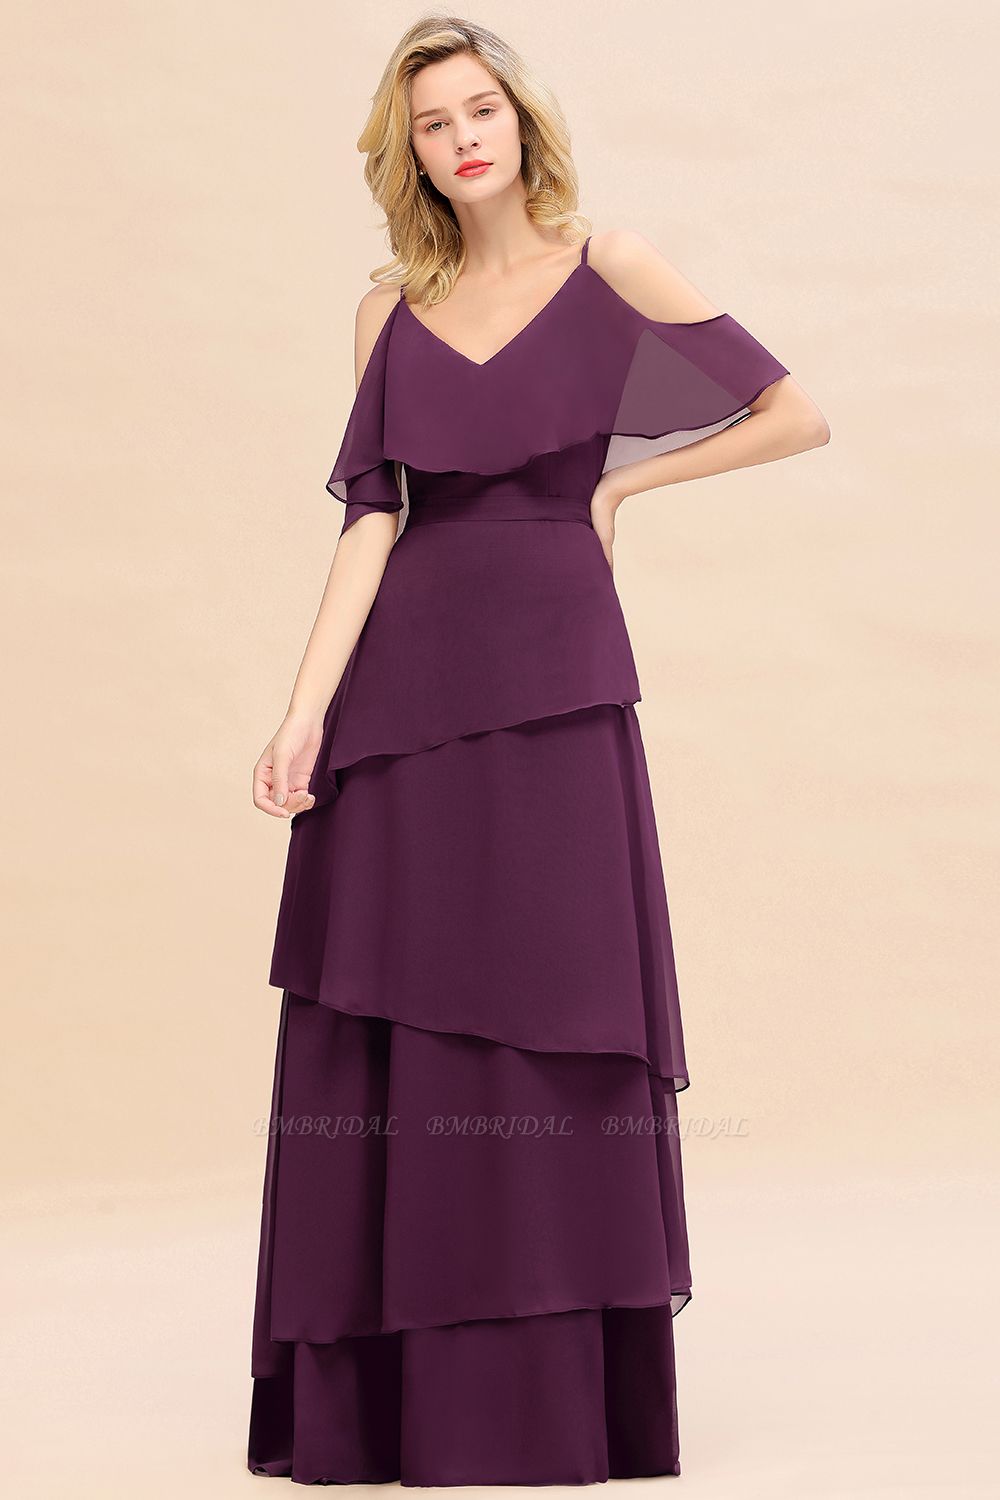 Four Factors To Help Choose A Perfect Bridesmaid Dress